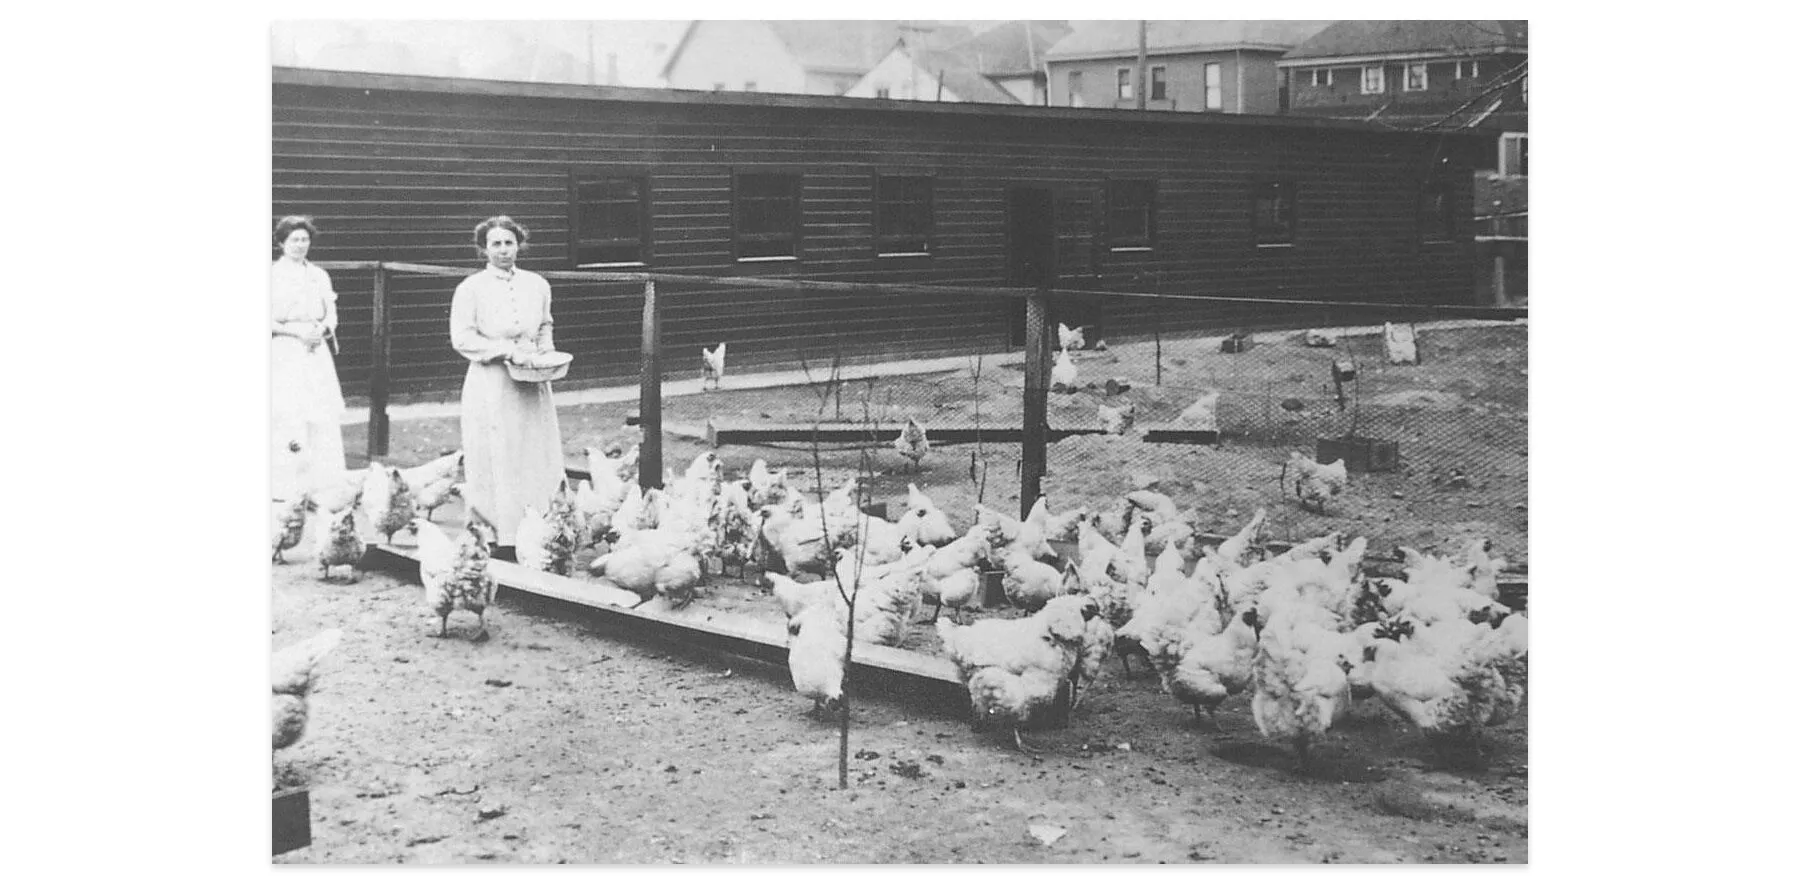 An archival photo of feeding chickens at the Indiana Reformatory Institution for Women and Girls in the 1890s.